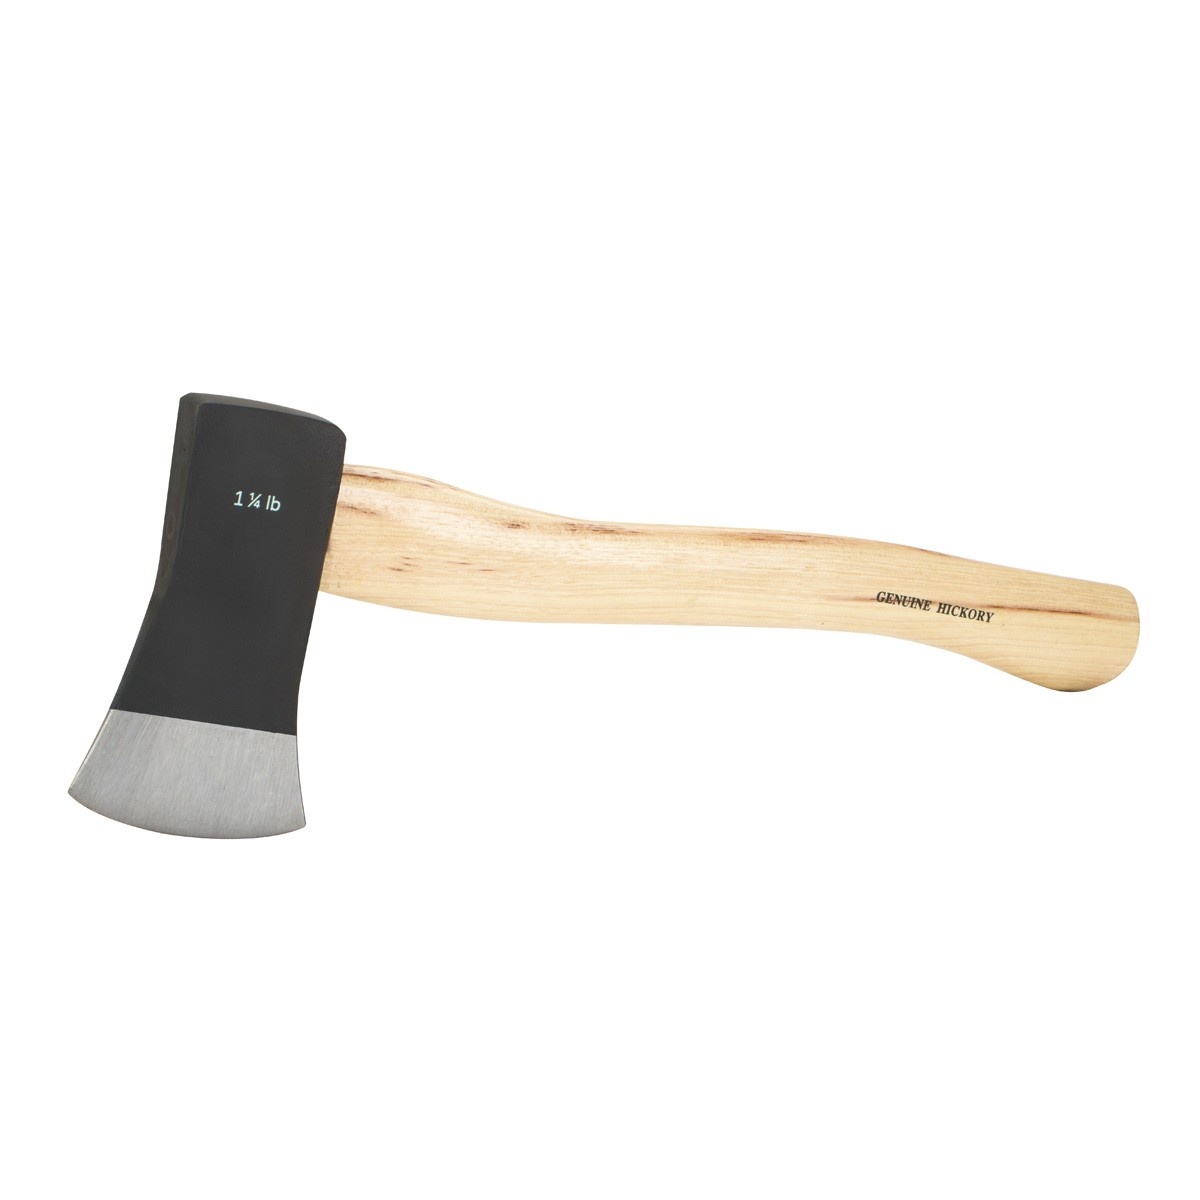 New   Pittsburgh  1-1/4 lb. Hickory Axe